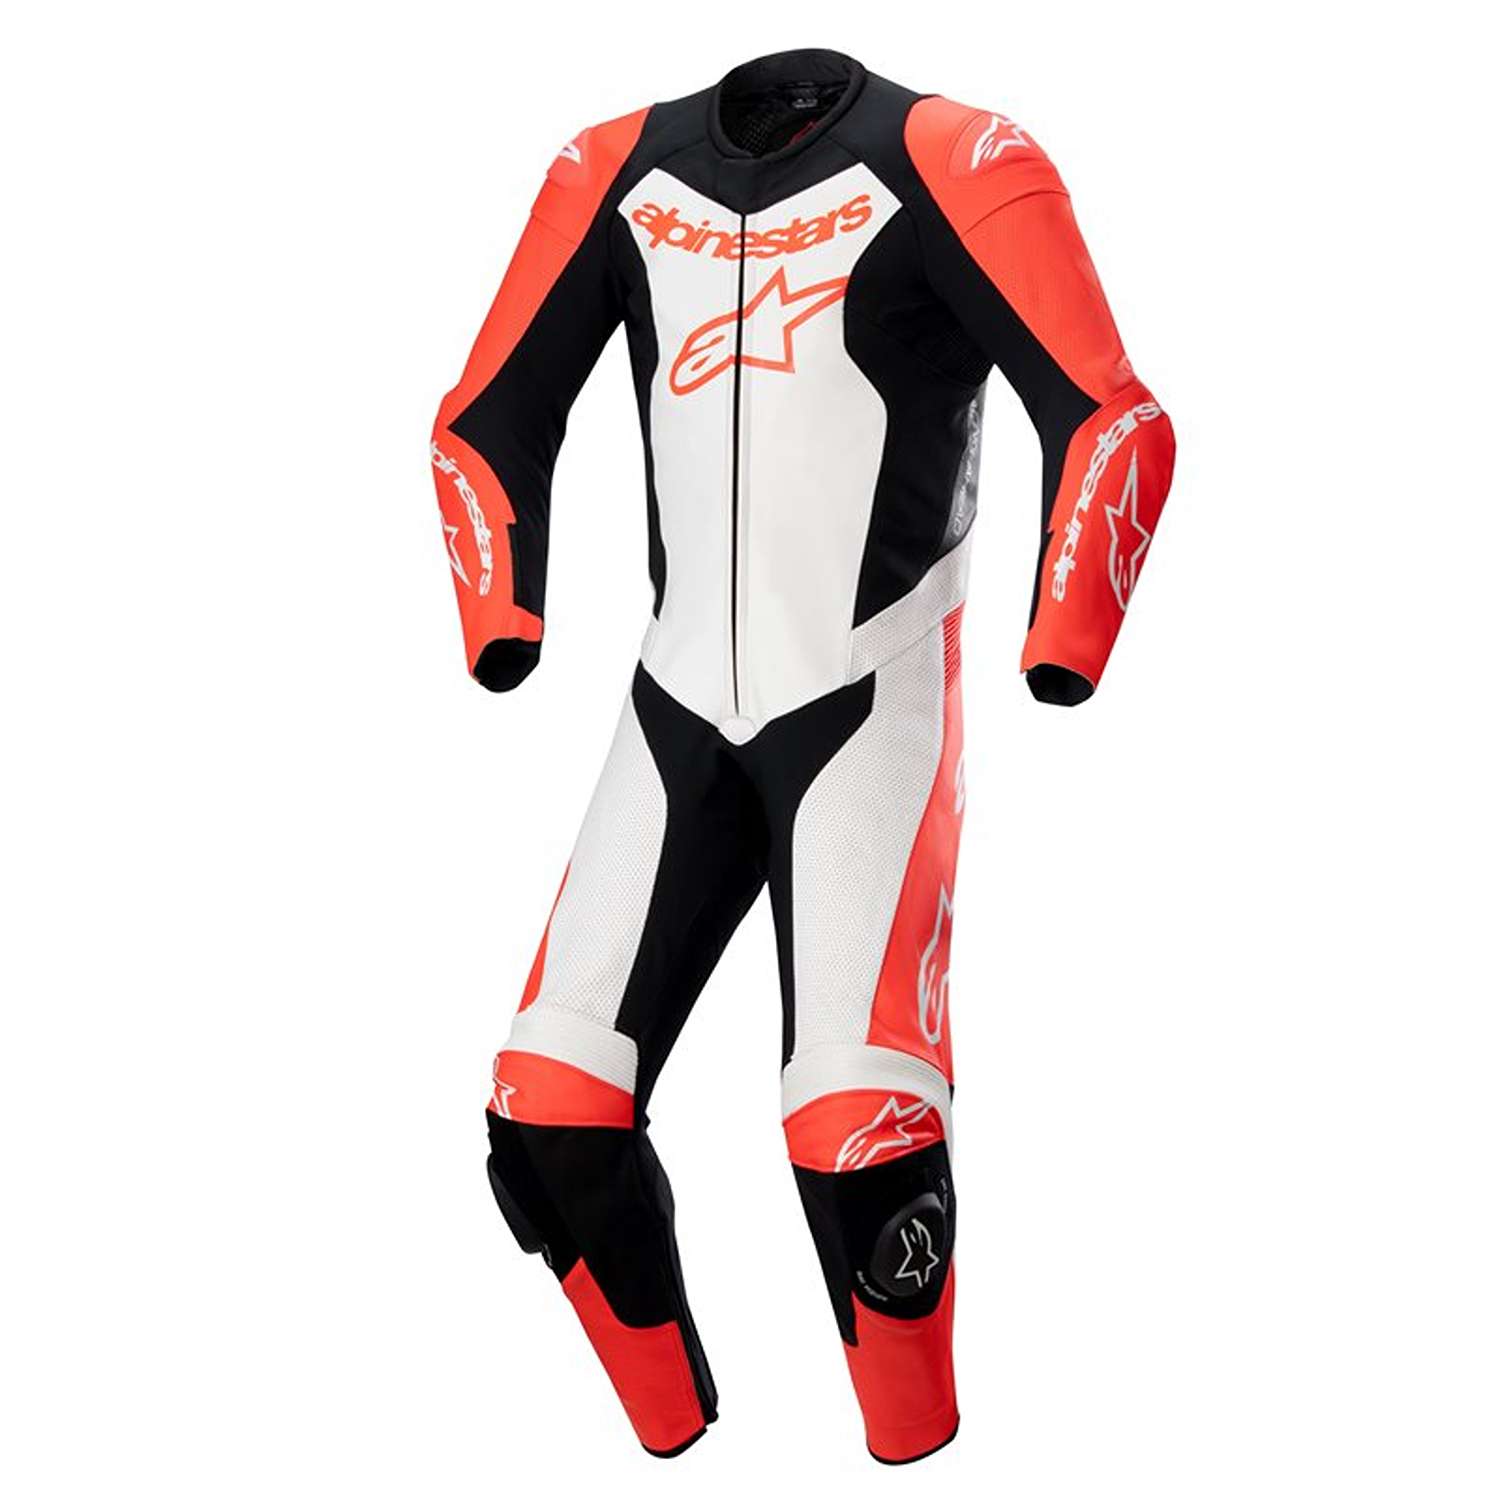 Image of Alpinestars Gp Force Lurv 1Pc Leather Suit Red Fluo White Black Size 54 EN